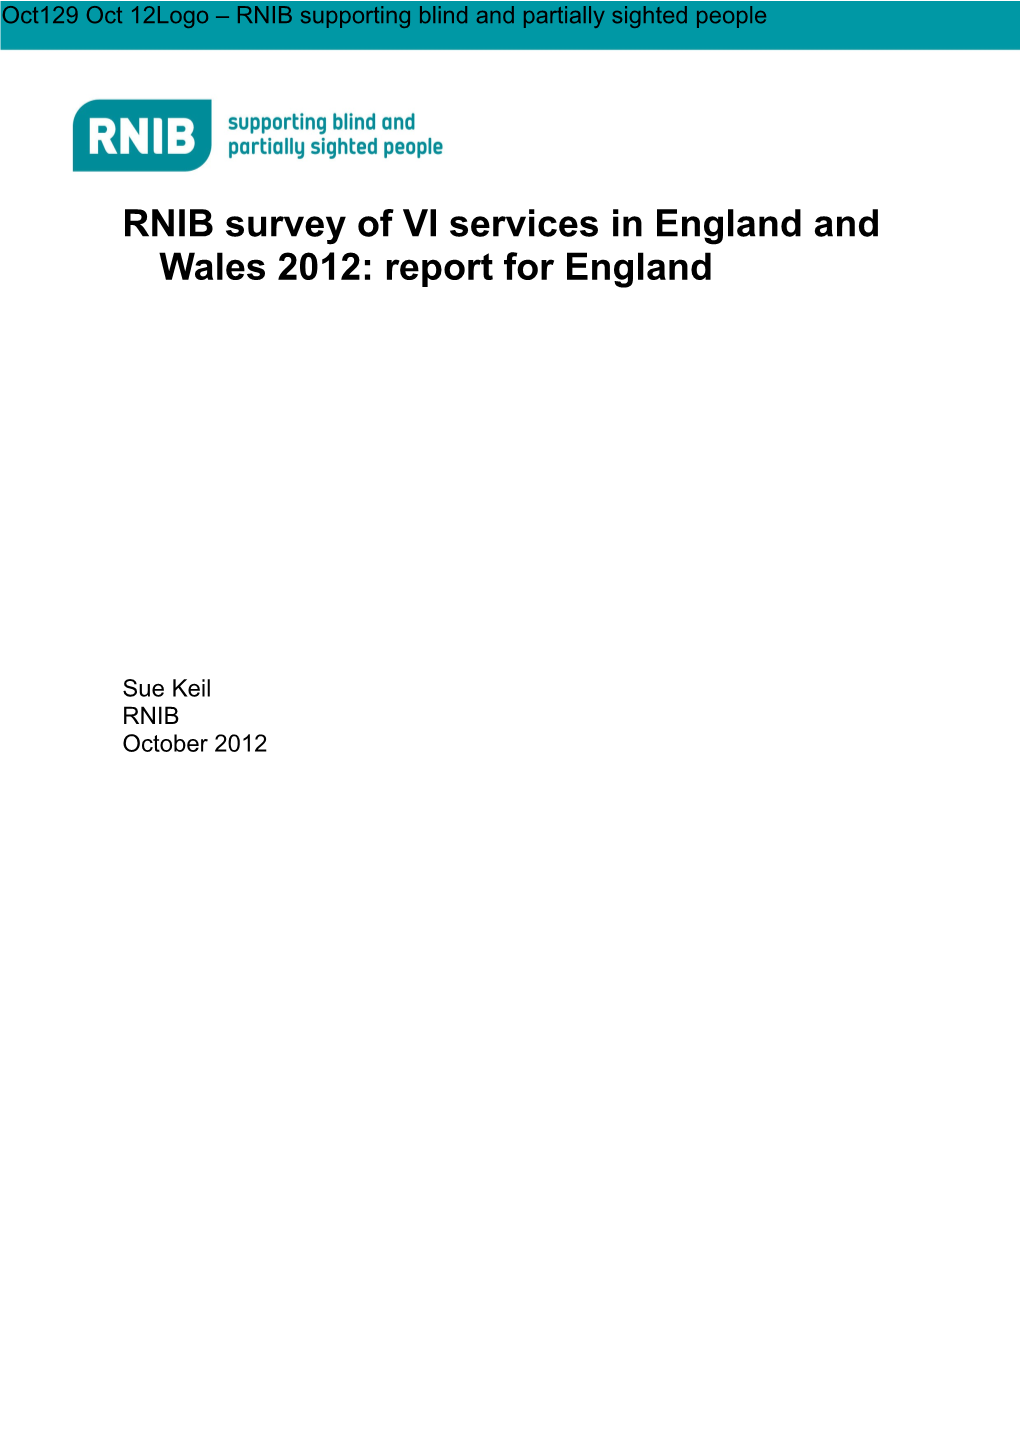 RNIB Survey of VI Services in England and Wales 2012: Report for England